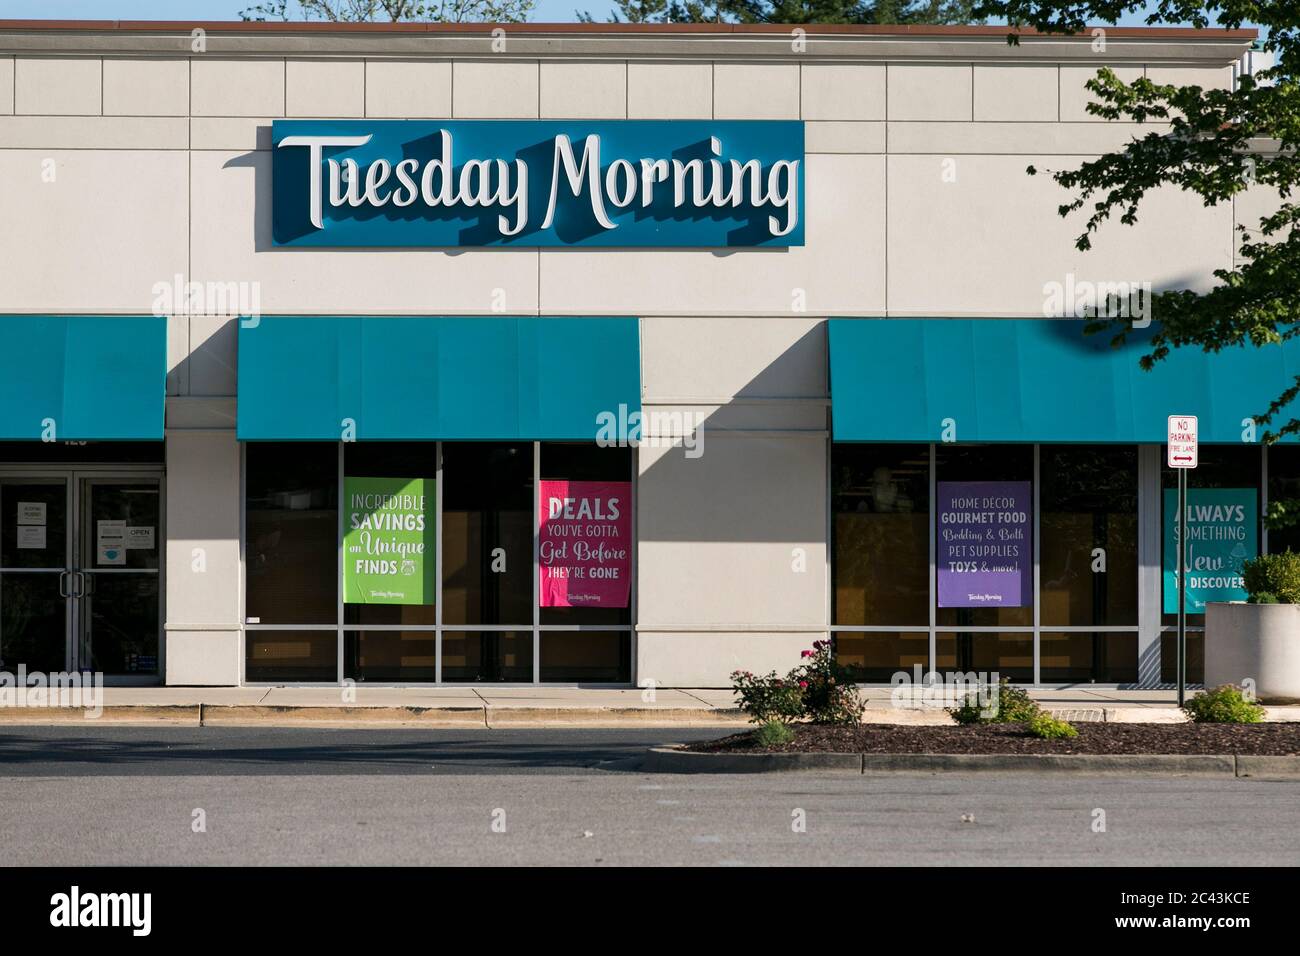 A logo sign outside of a Tuesday Morning retail store location in Bowie, Maryland on June 8, 2020. Stock Photo